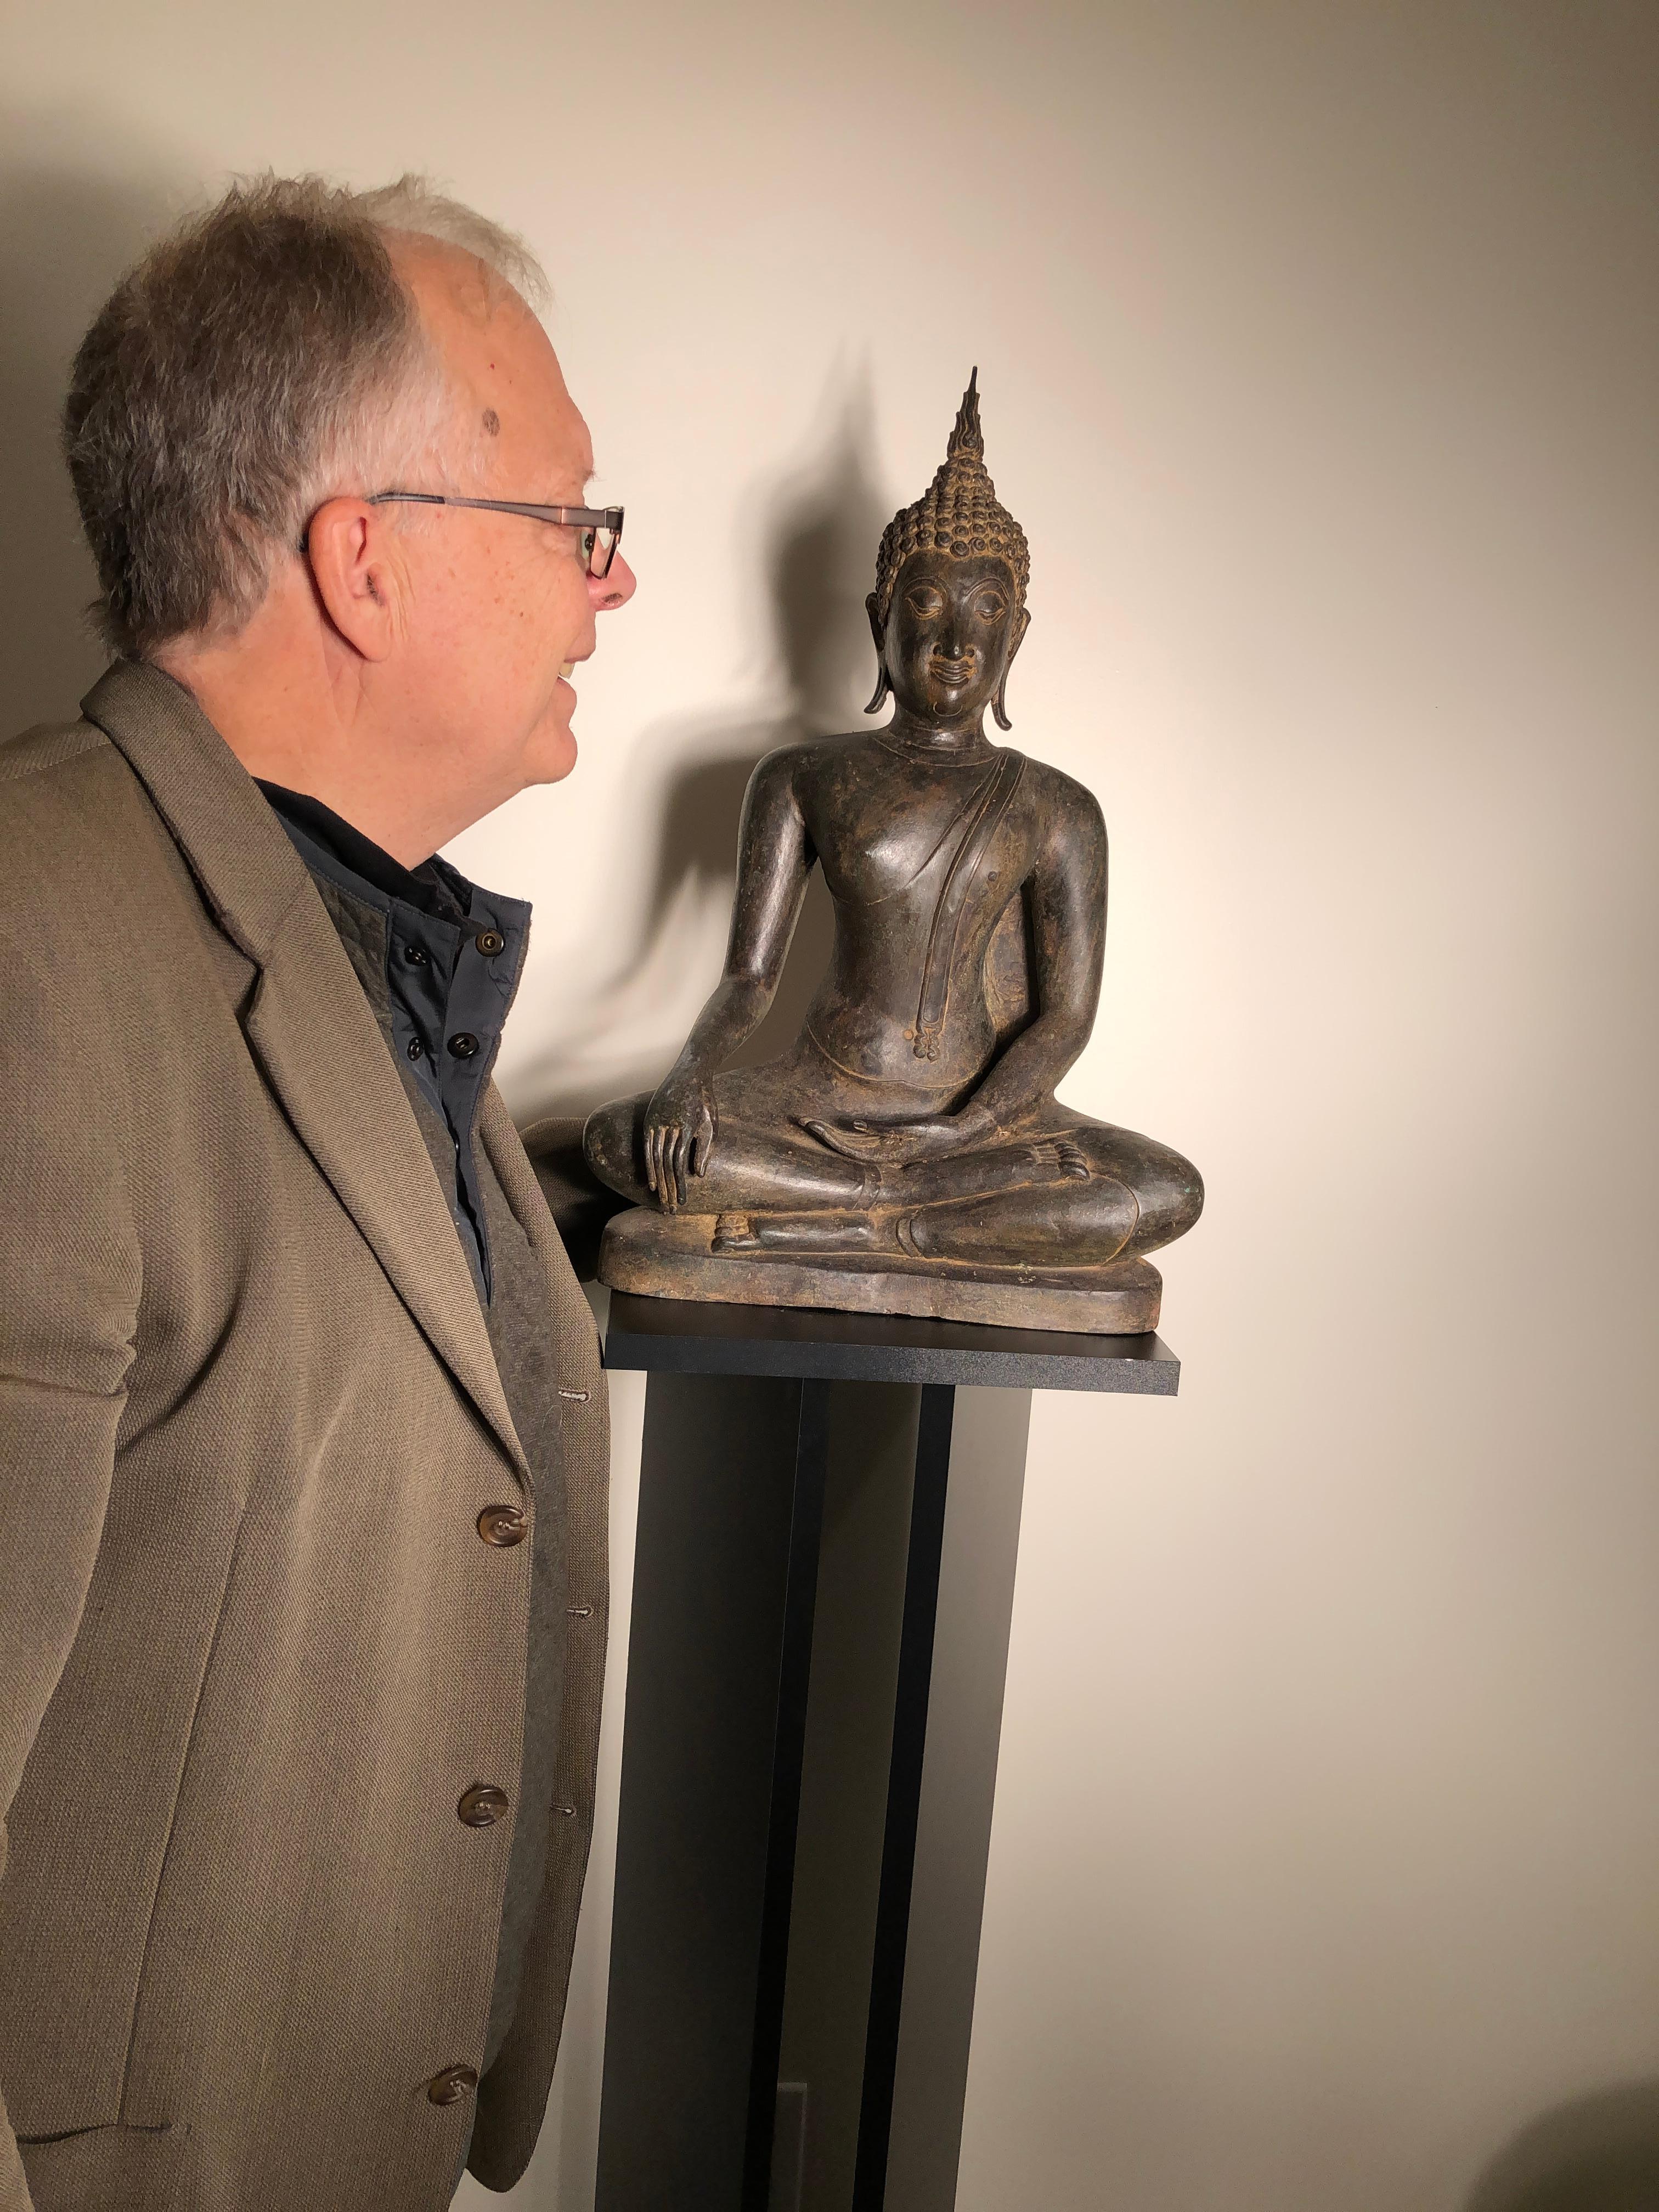 From a fifty year old UK Buddhist Collection.

Thailand bronze Buddha 18th century Sukhothai Enlightenment Buddha. 

This beautiful Buddha sculpture will bring serenity and timeless style to your home, office, sacred, or garden space. 

The Buddha